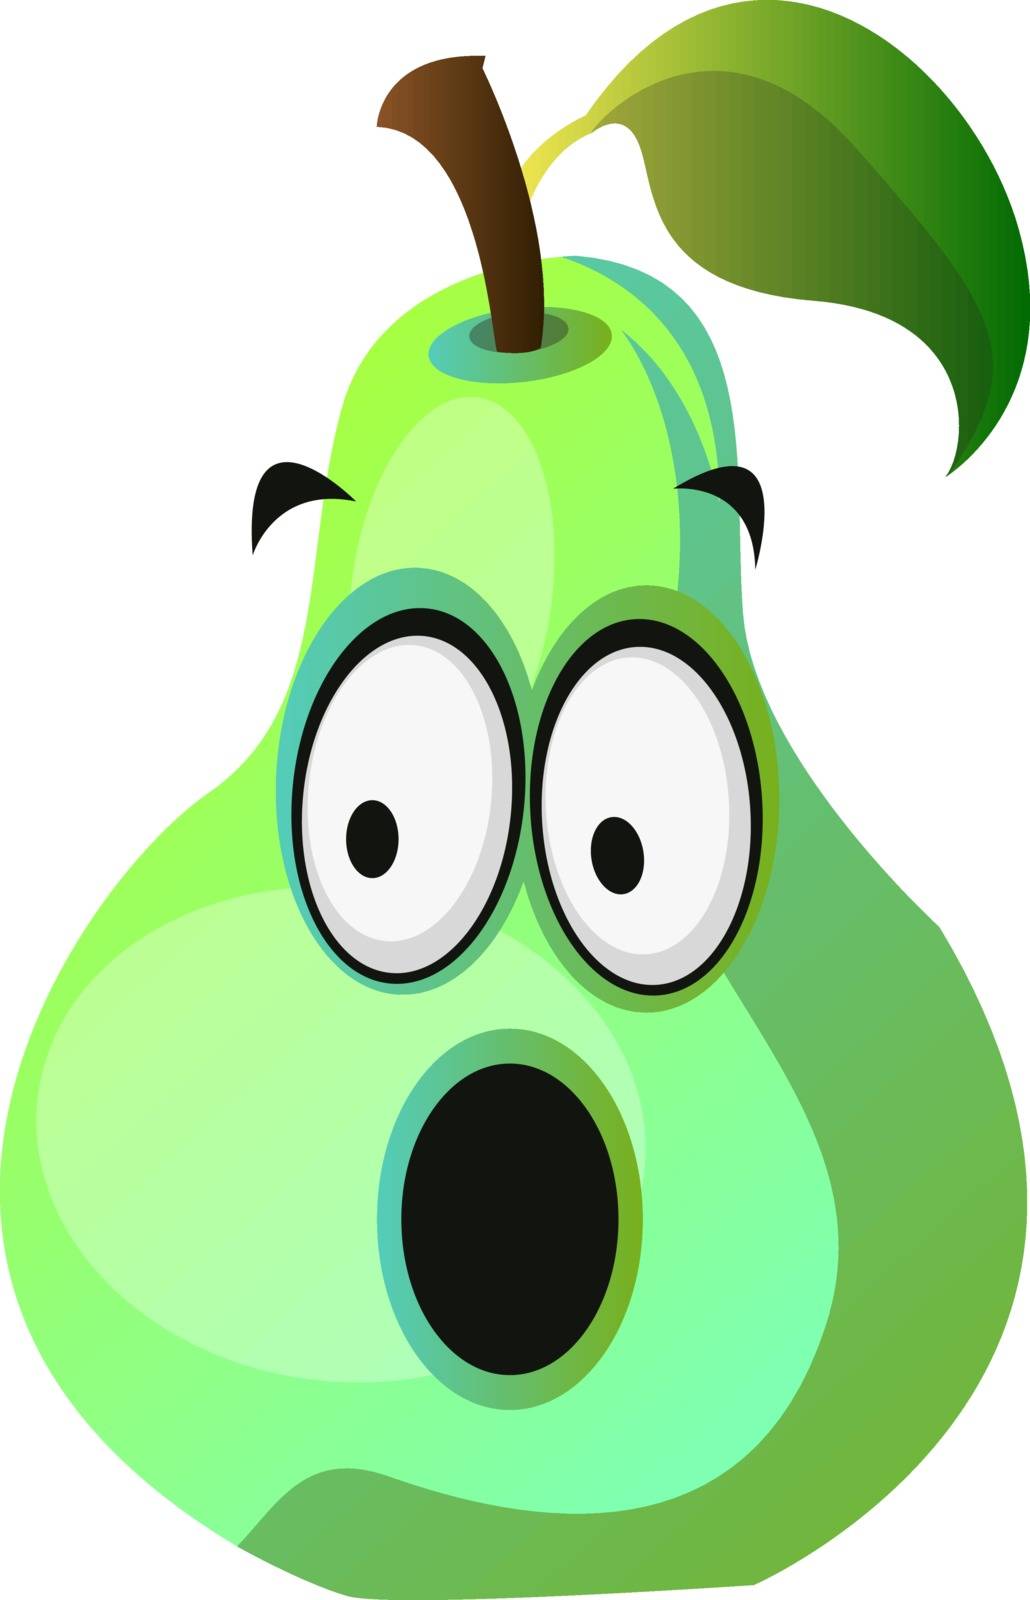 Amazed pear cartoon face illustration vector on white background by Morphart